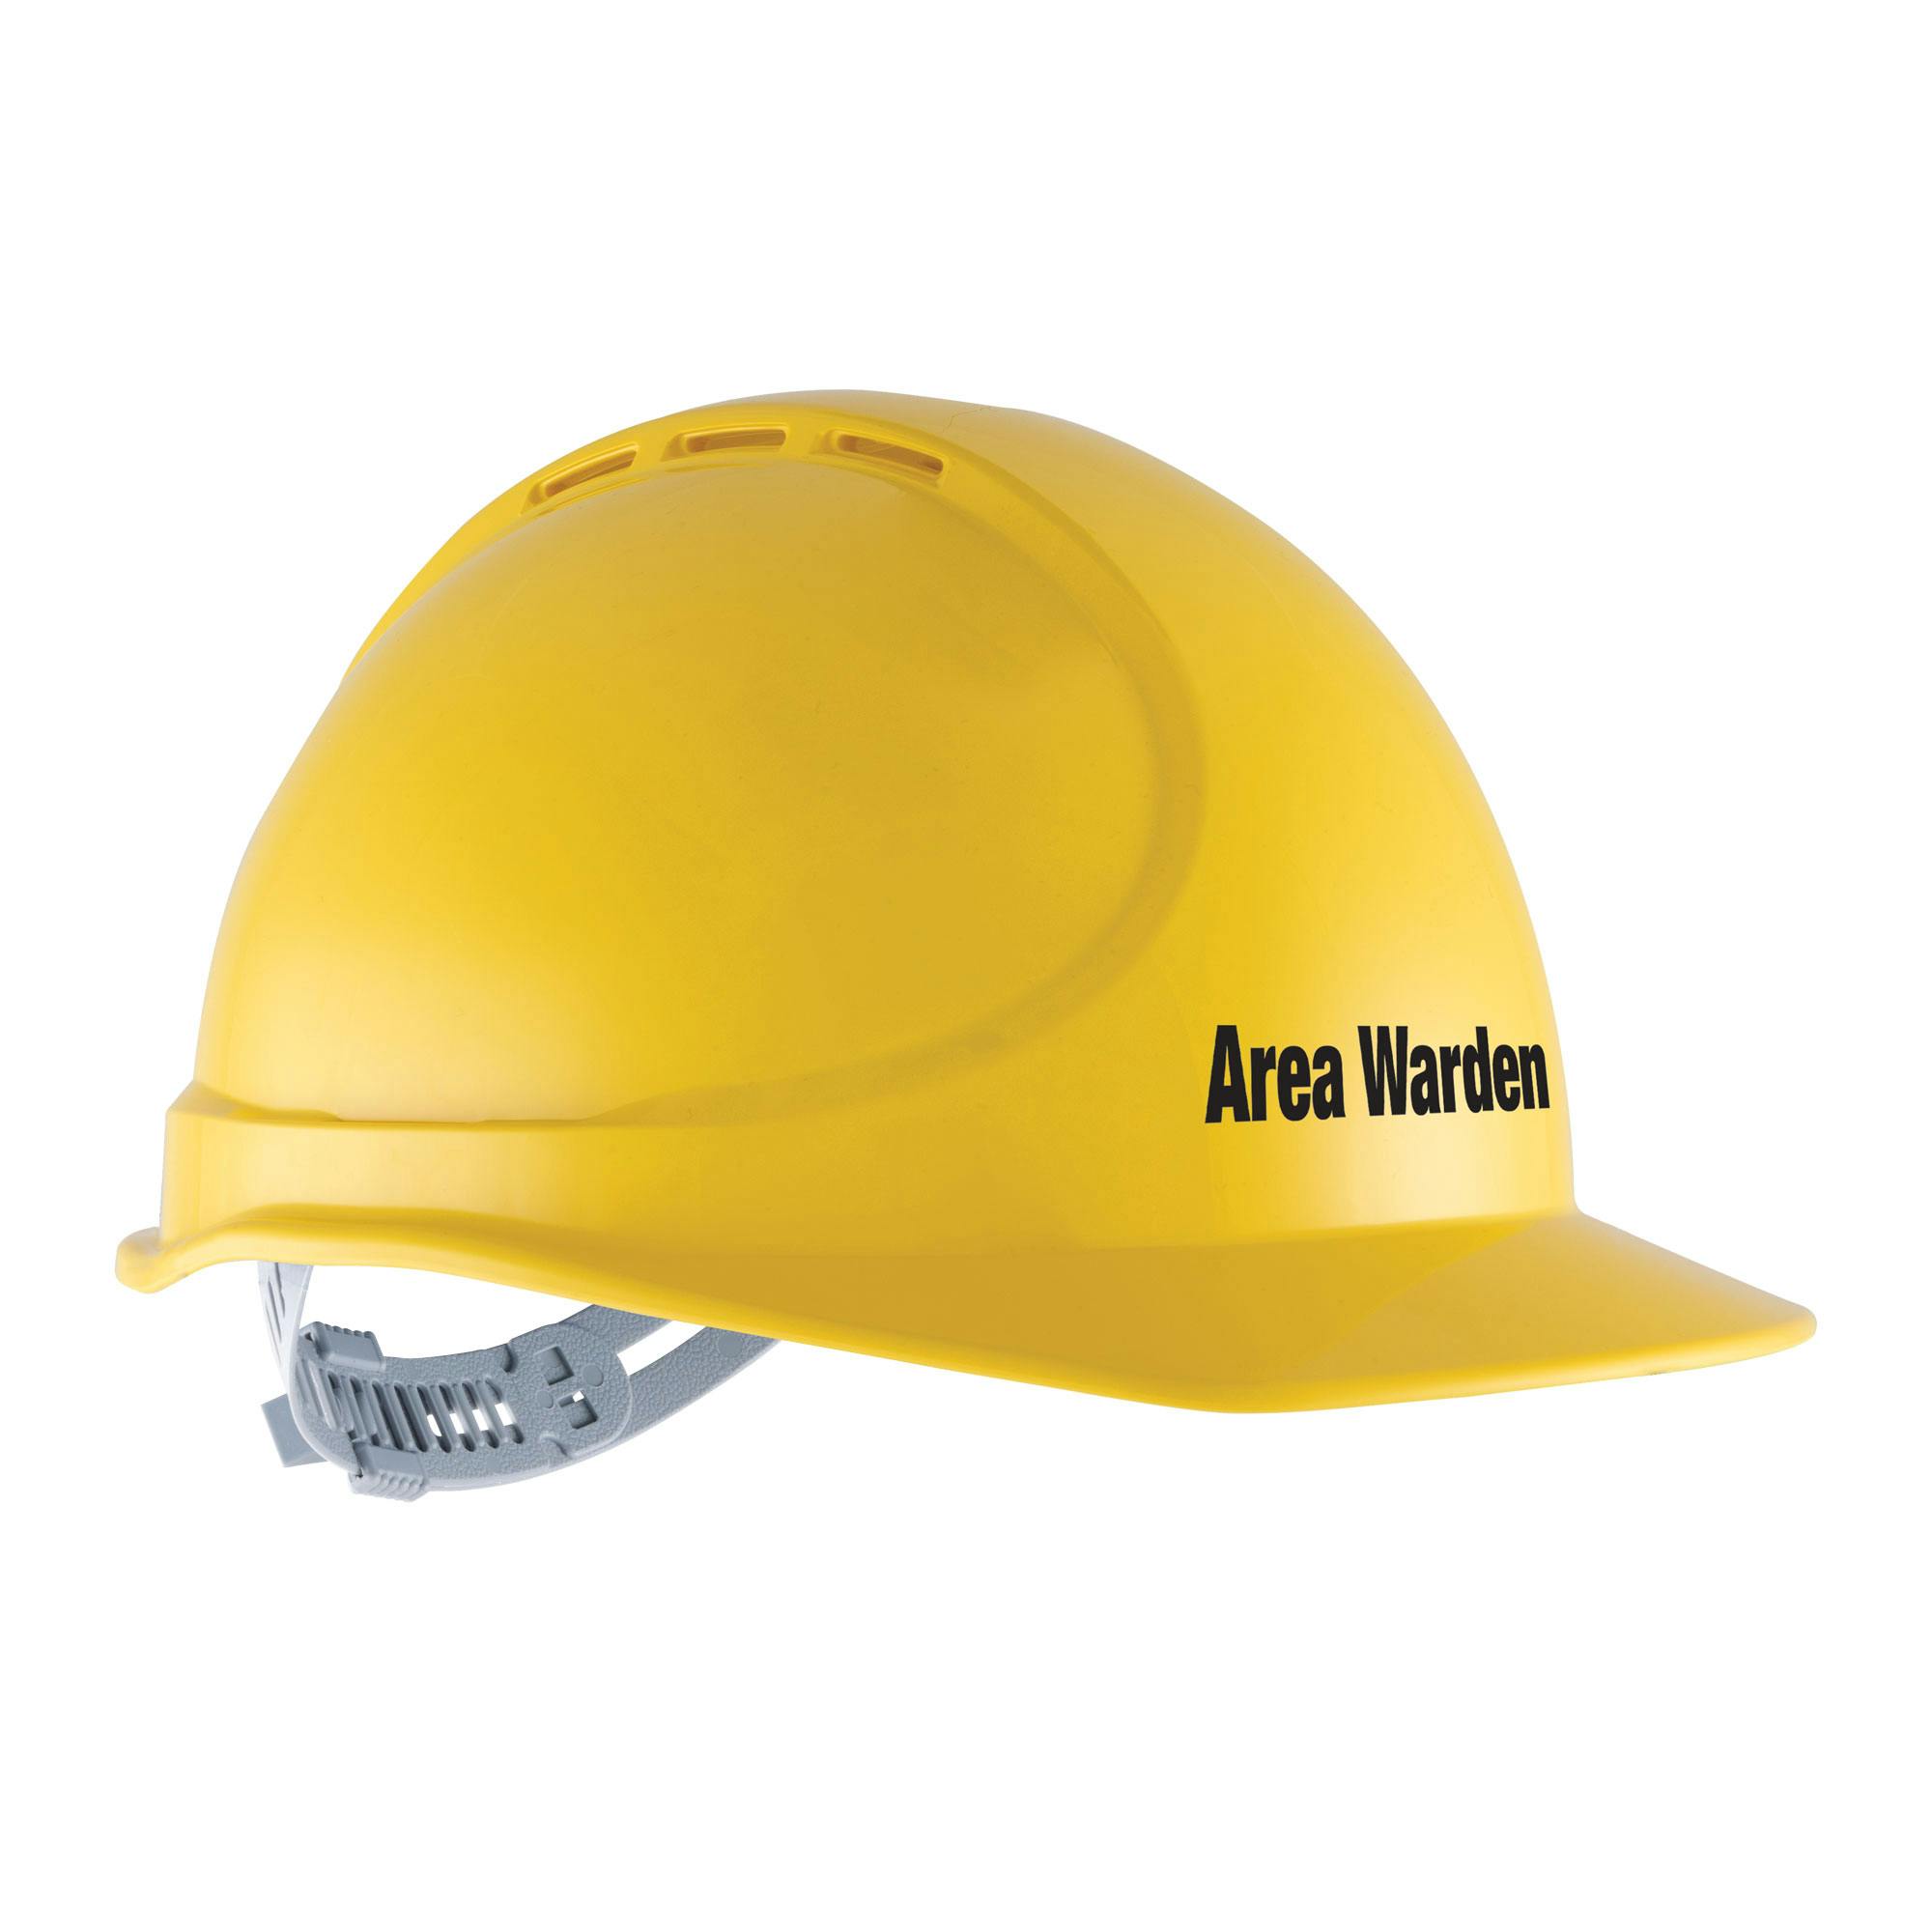 Force360 GTE3 ABS Vented Hard Hat With Slide Lock Harness, Type1